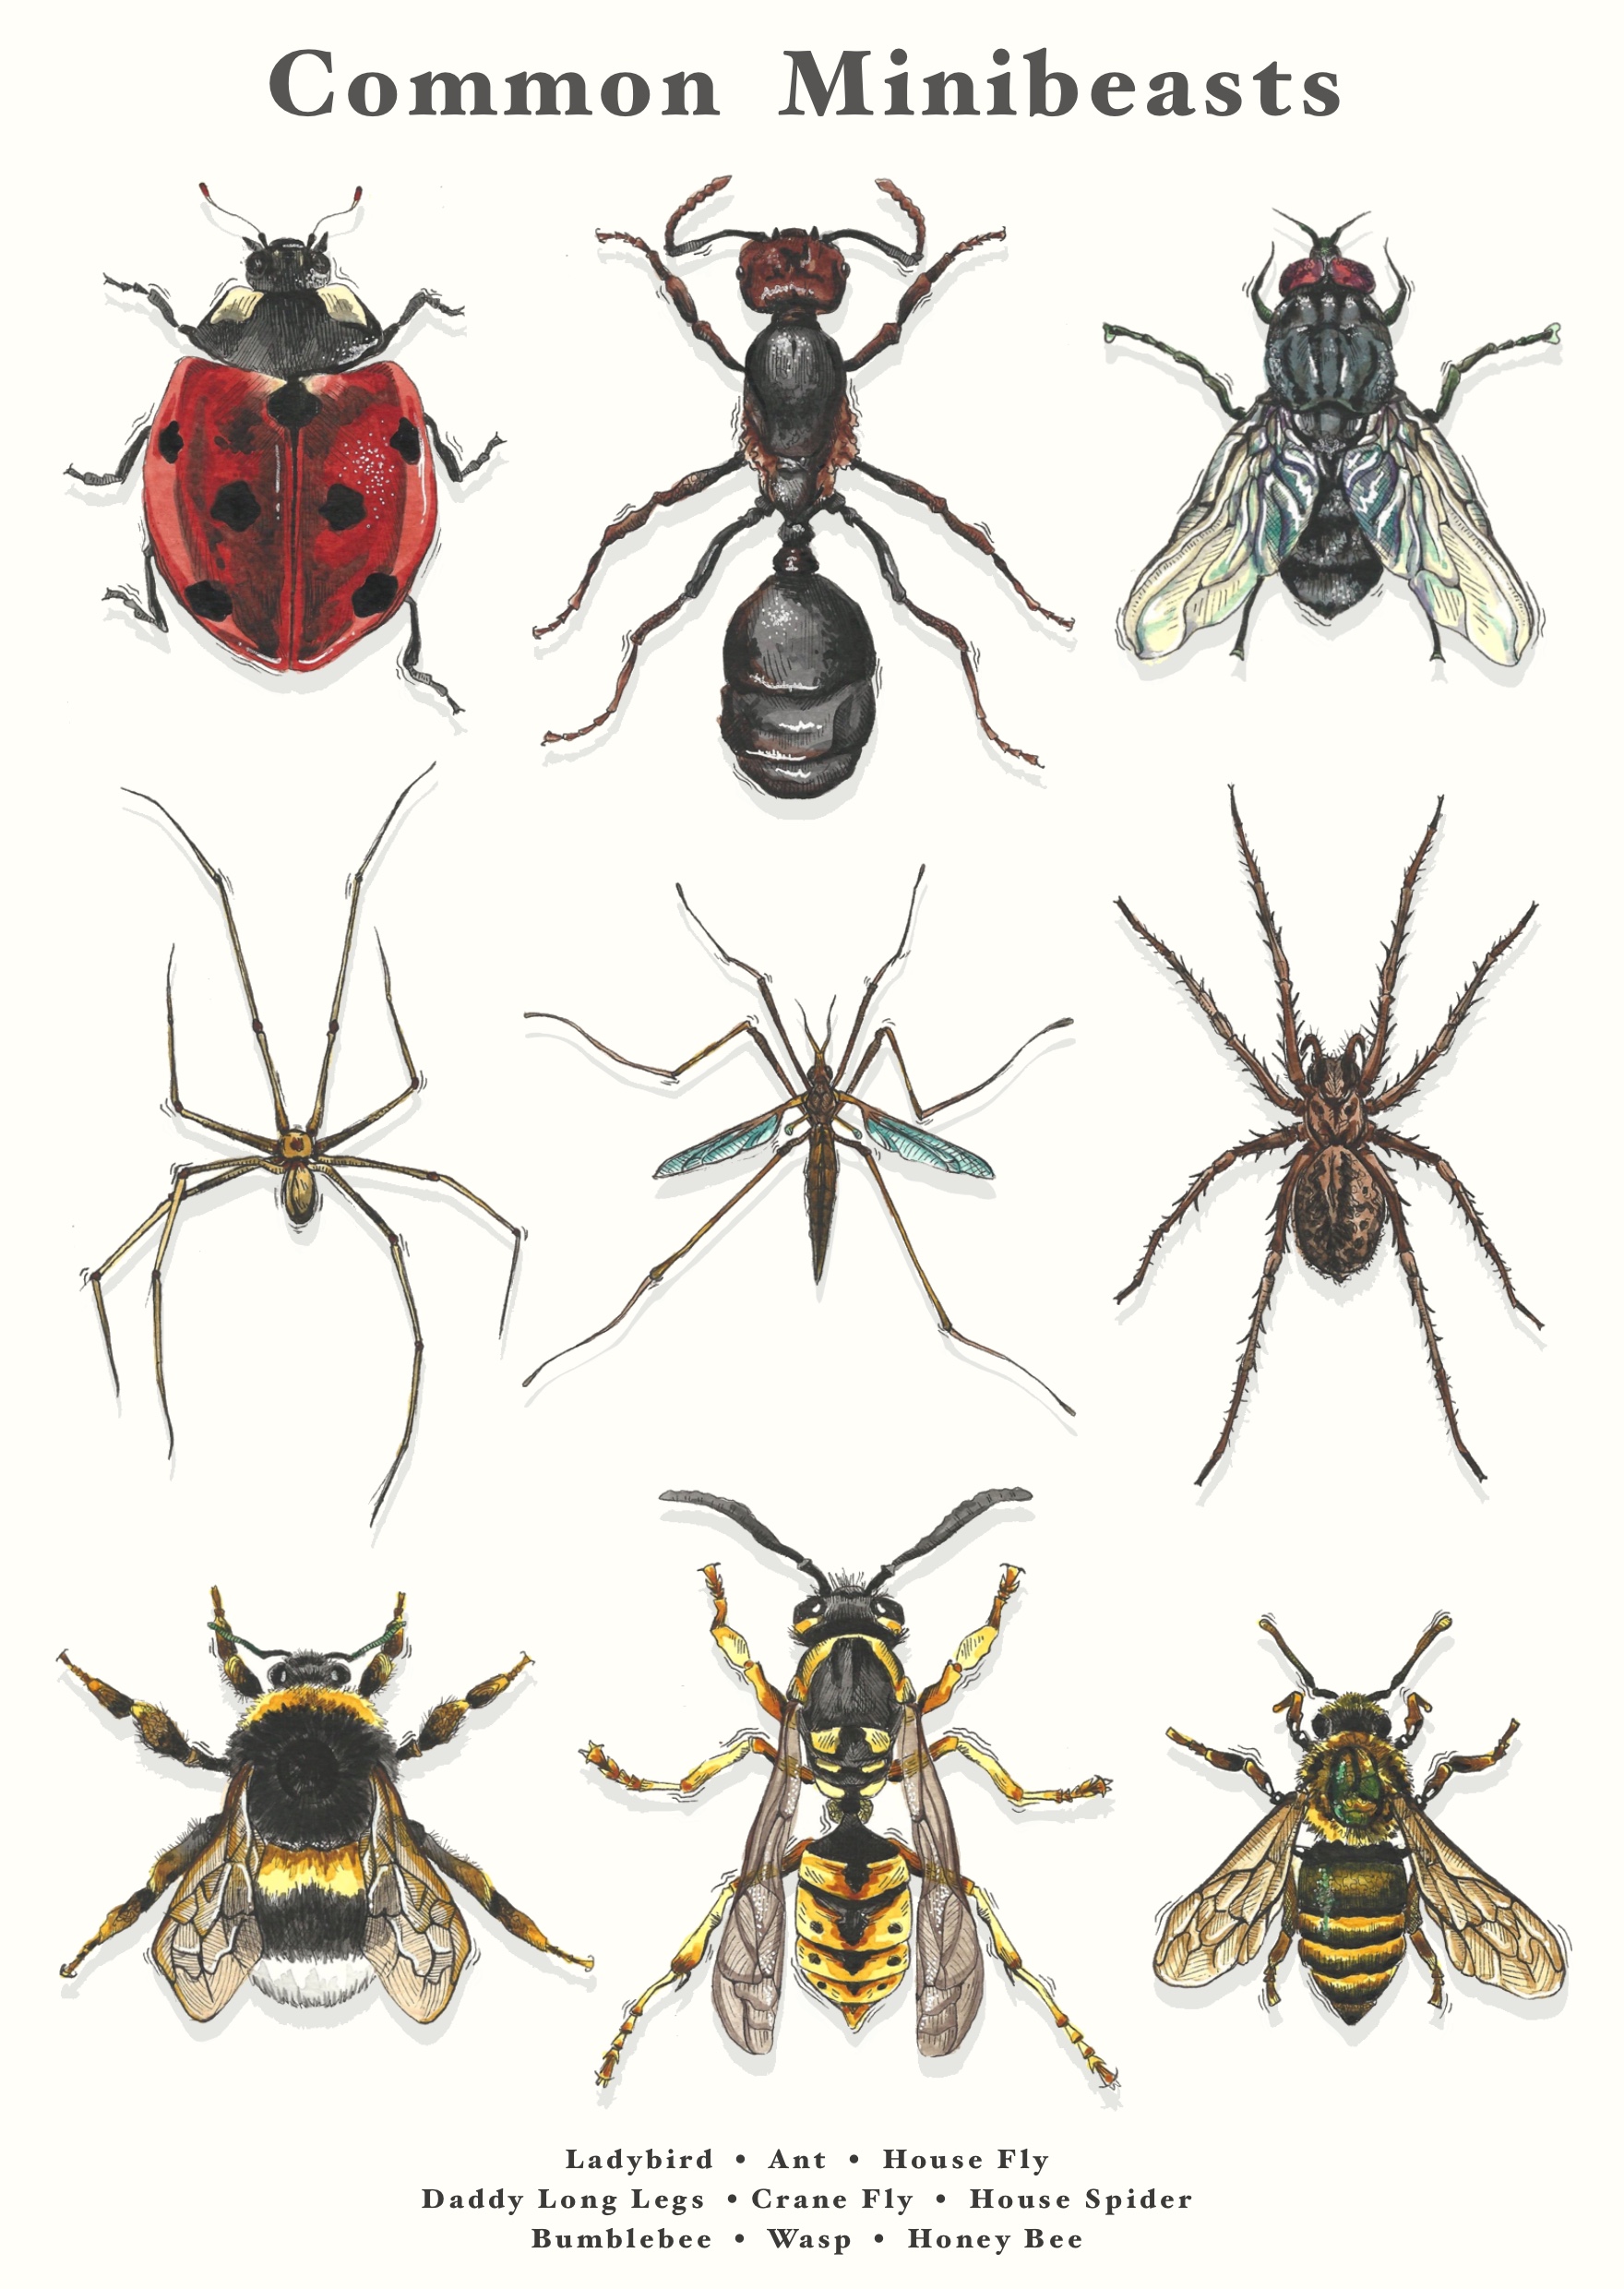 Illustration by Grace Bastion showing nine minibeast species found in most UK gardens.